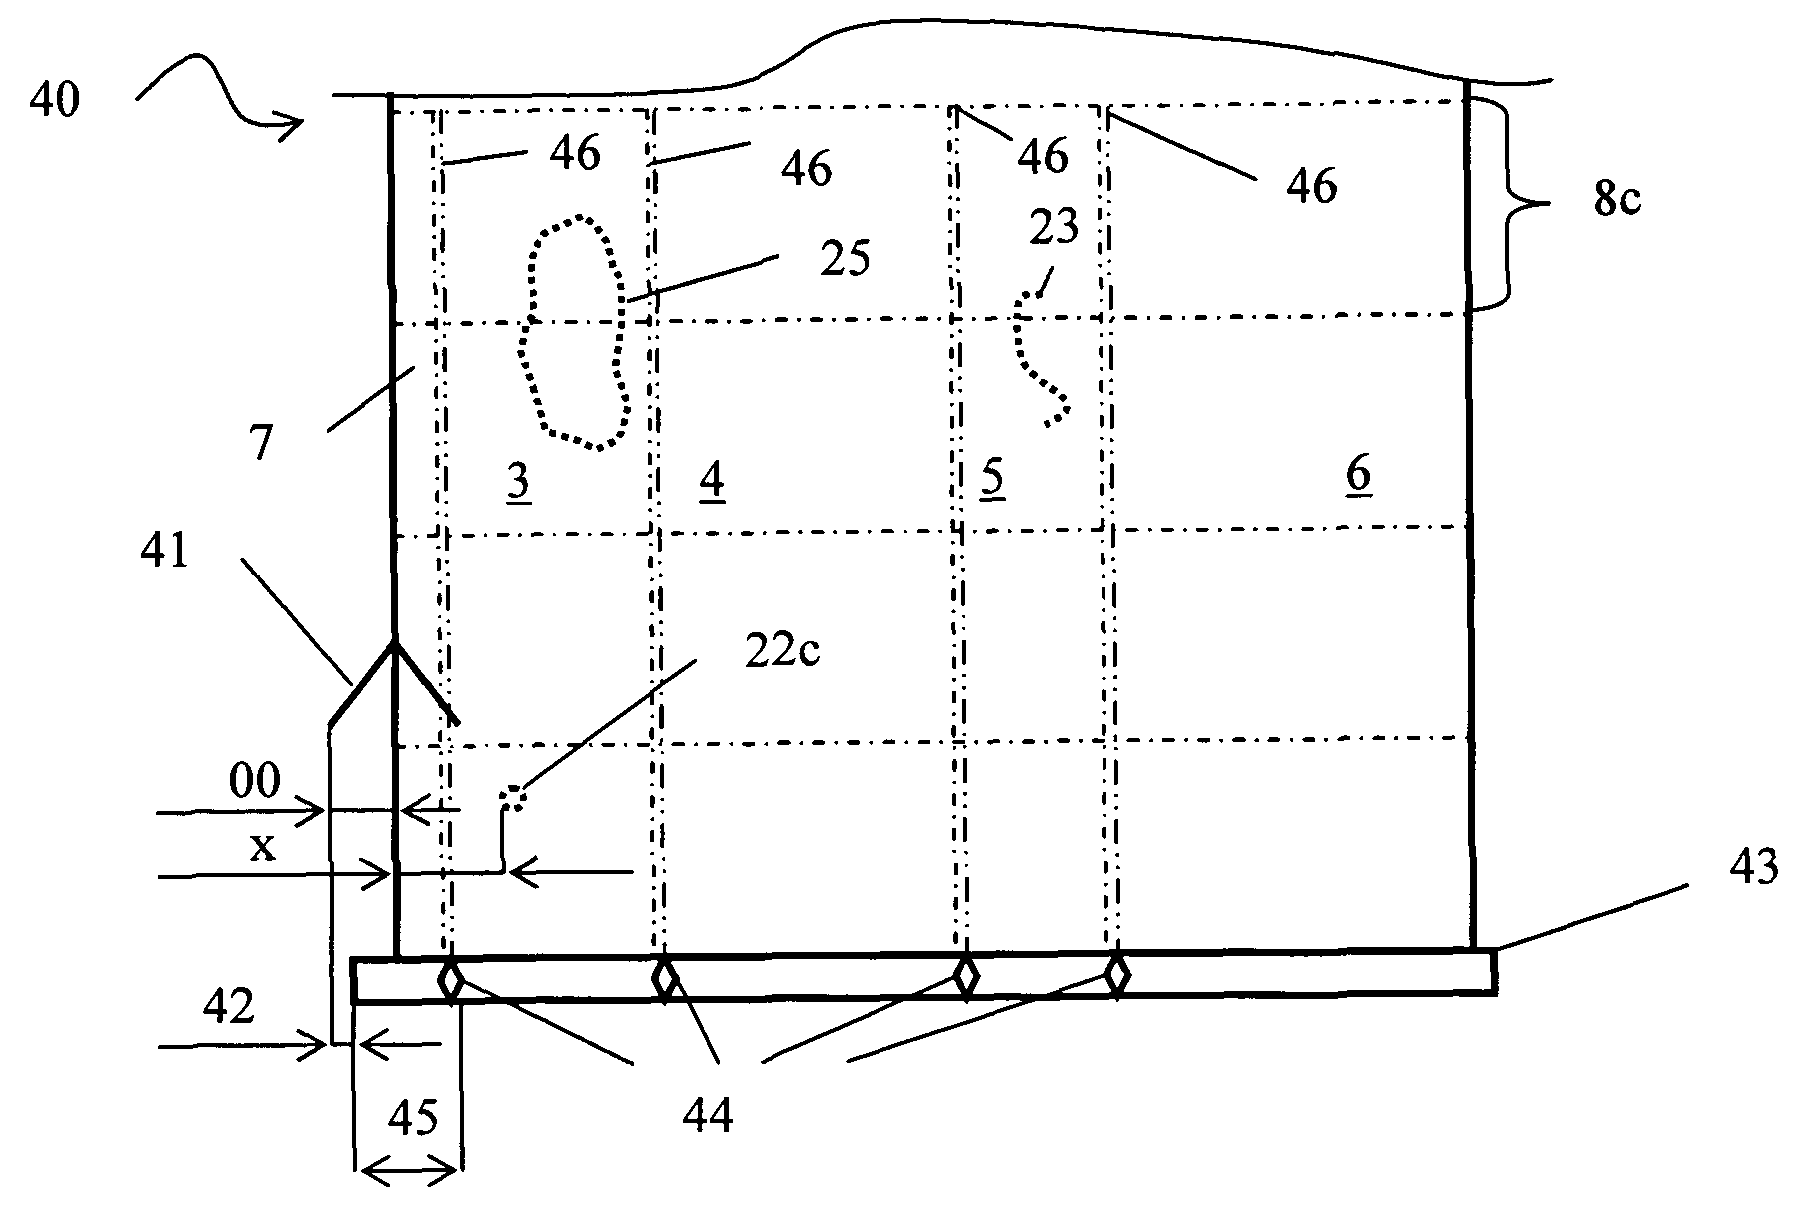 Method for creating a cutting plan for a strip-like material